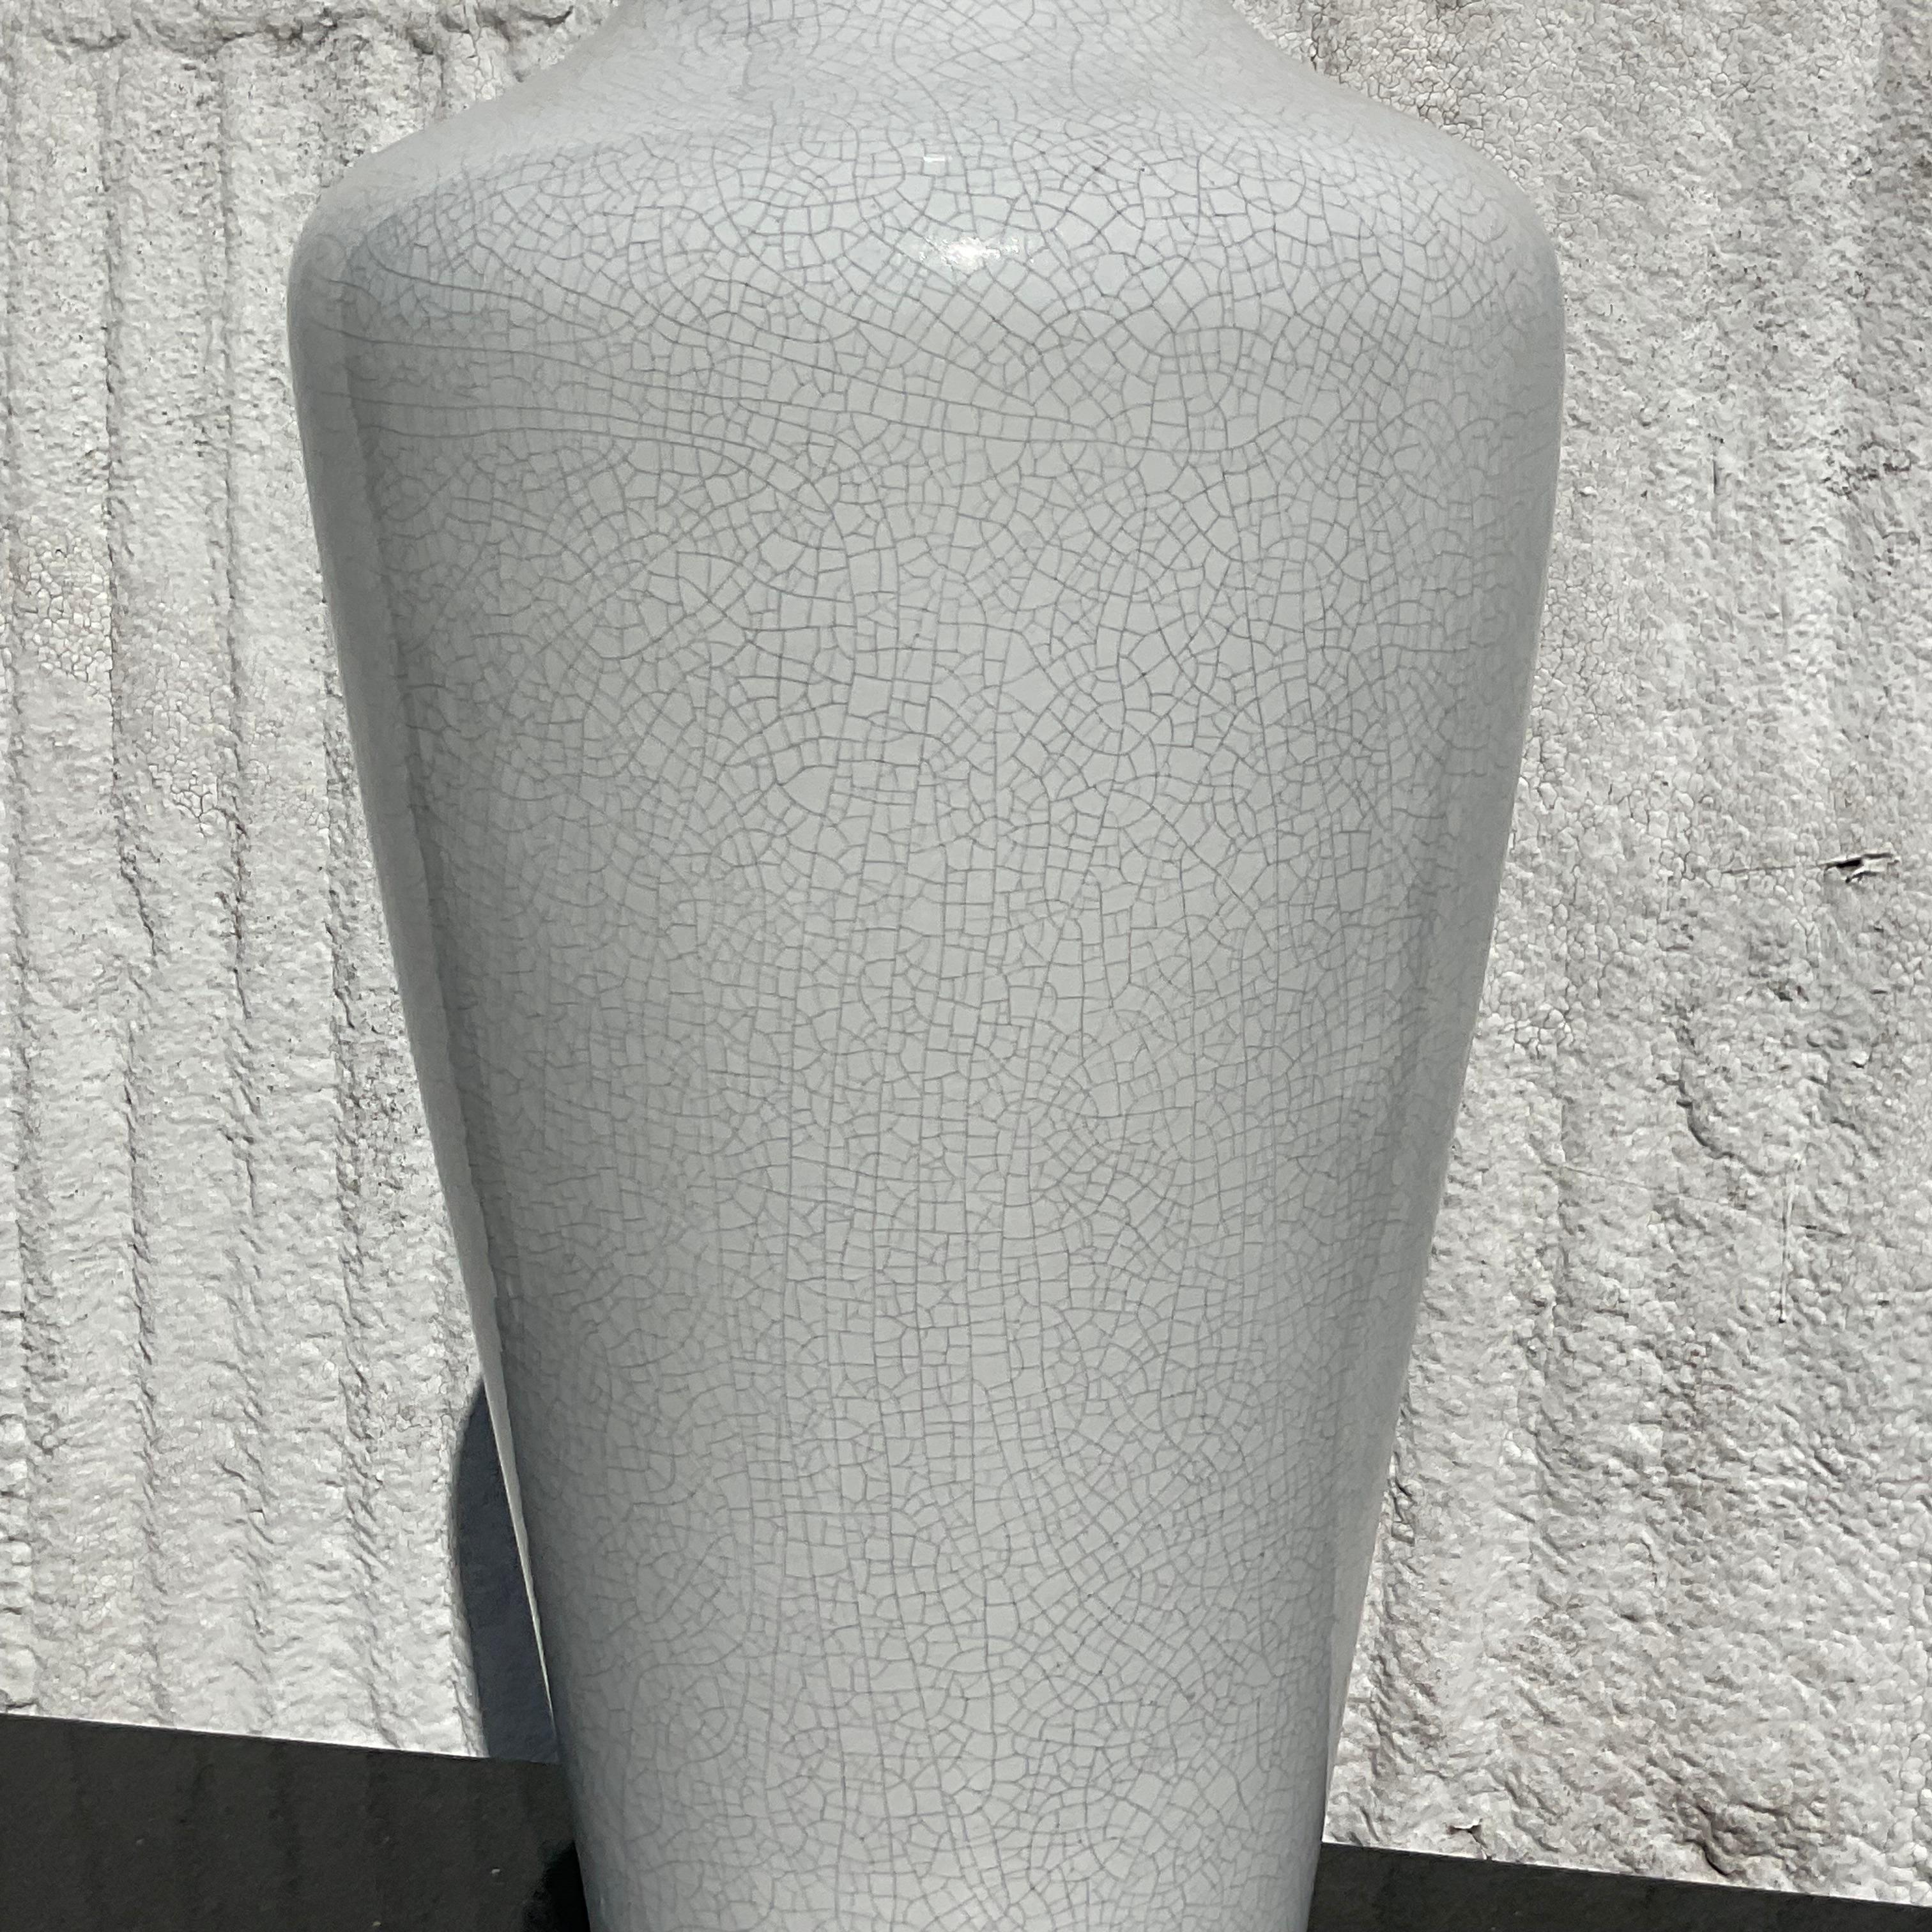 A fabulous vintage Coastal tall ceramic vase. A chic crackle finish in a cool alabaster color. Acquired from a Palm Beach estate.